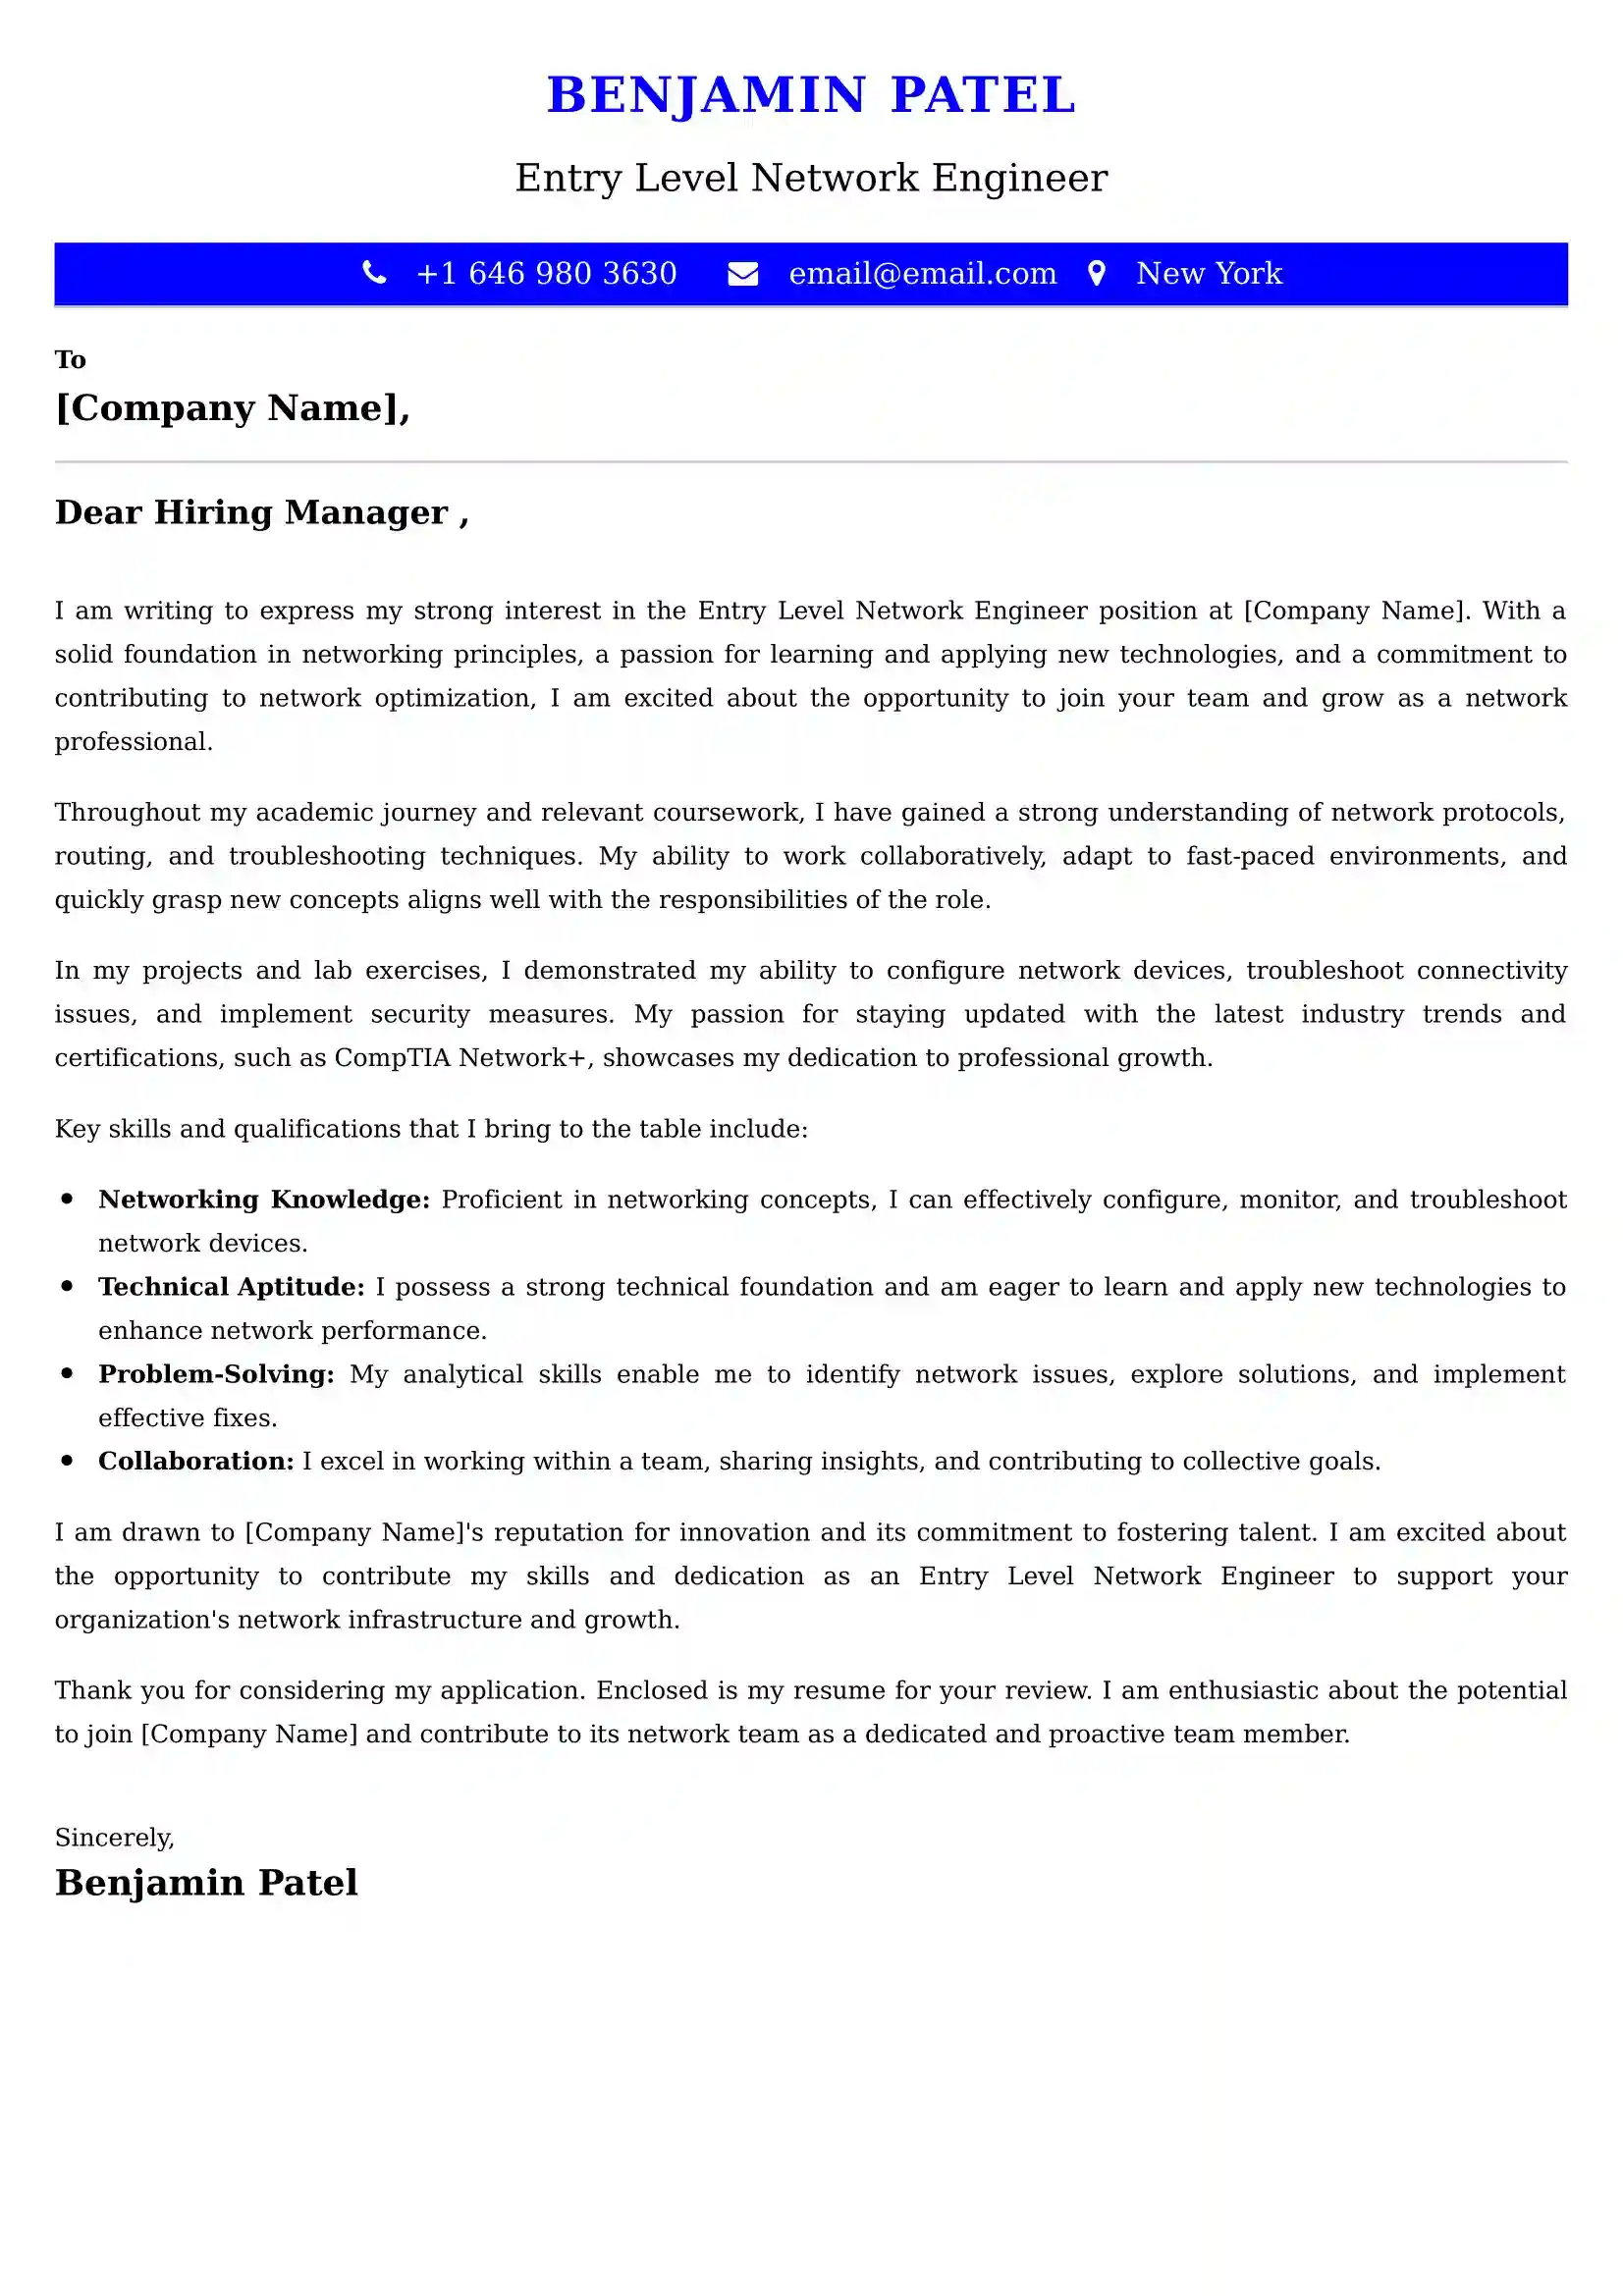 Entry Level Network Engineer Cover Letter Examples - Latest UK Format